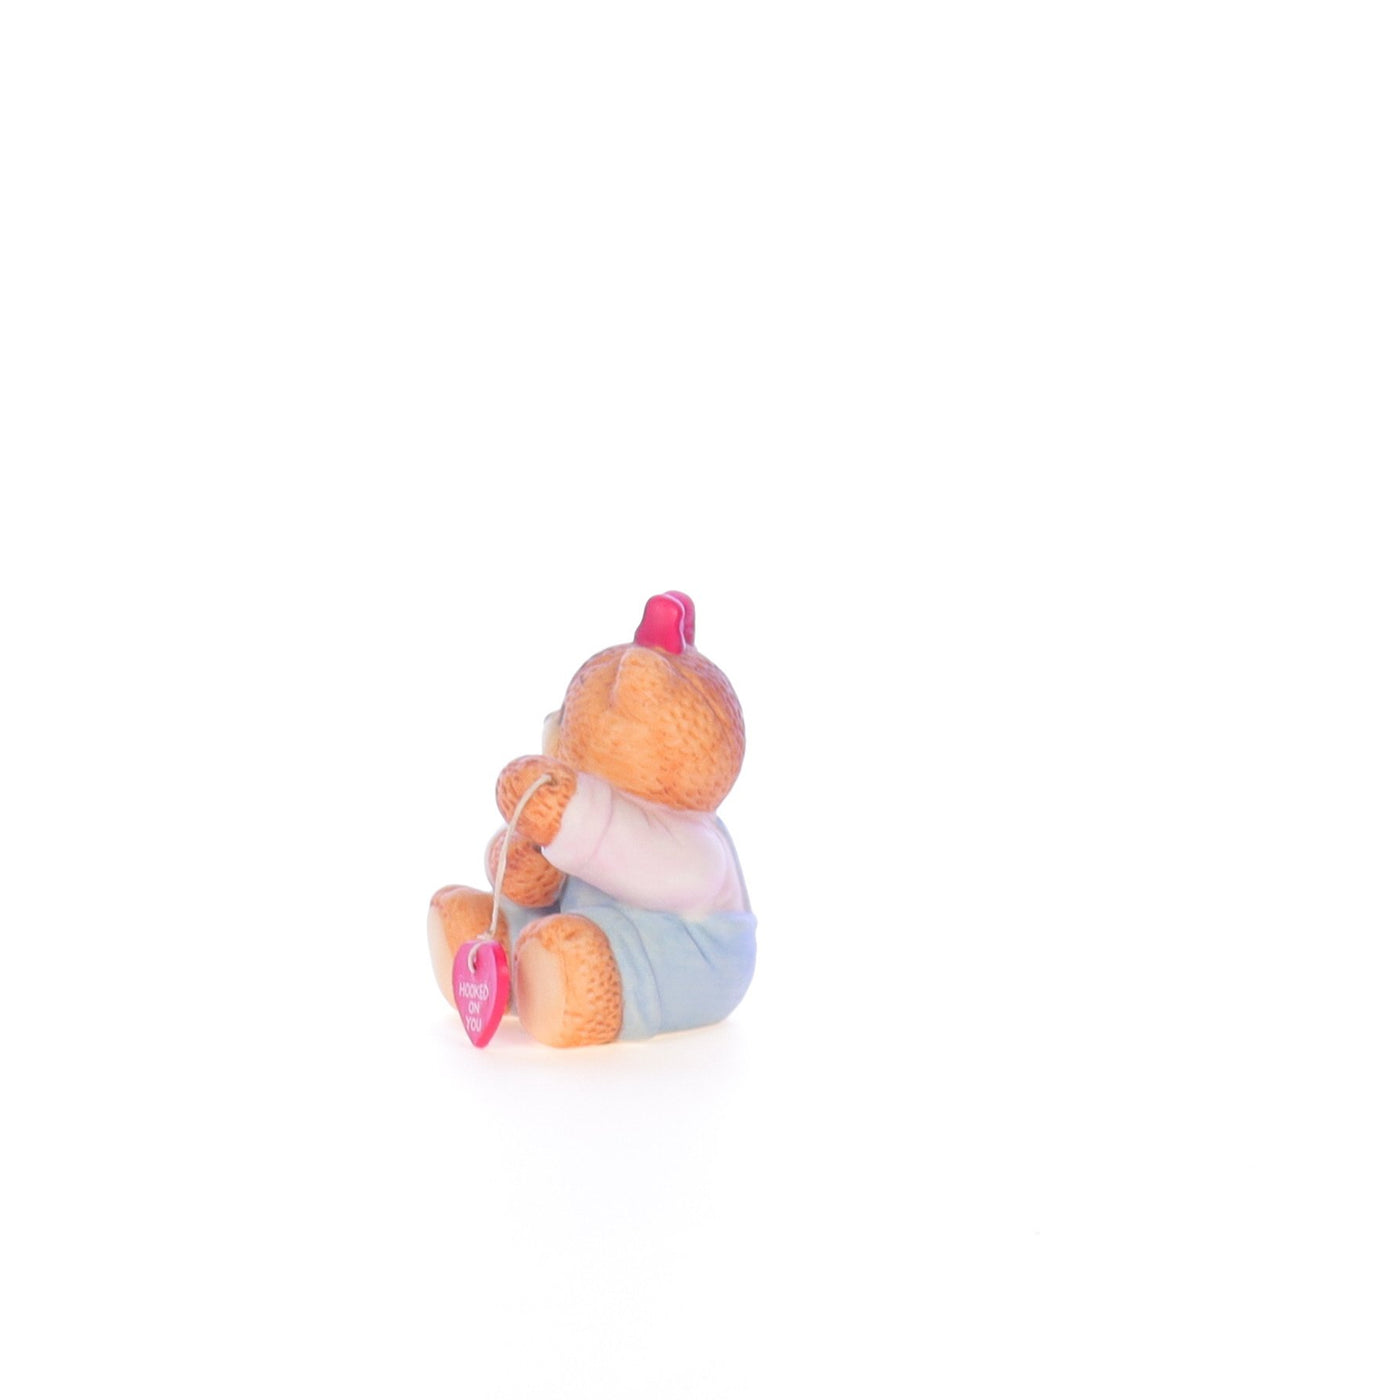 Lucy_And_Me_by_Lucy_Atwell_Porcelain_Figurine_Girl_Bear_with_Valentine_Lucy_Unknown_079_03